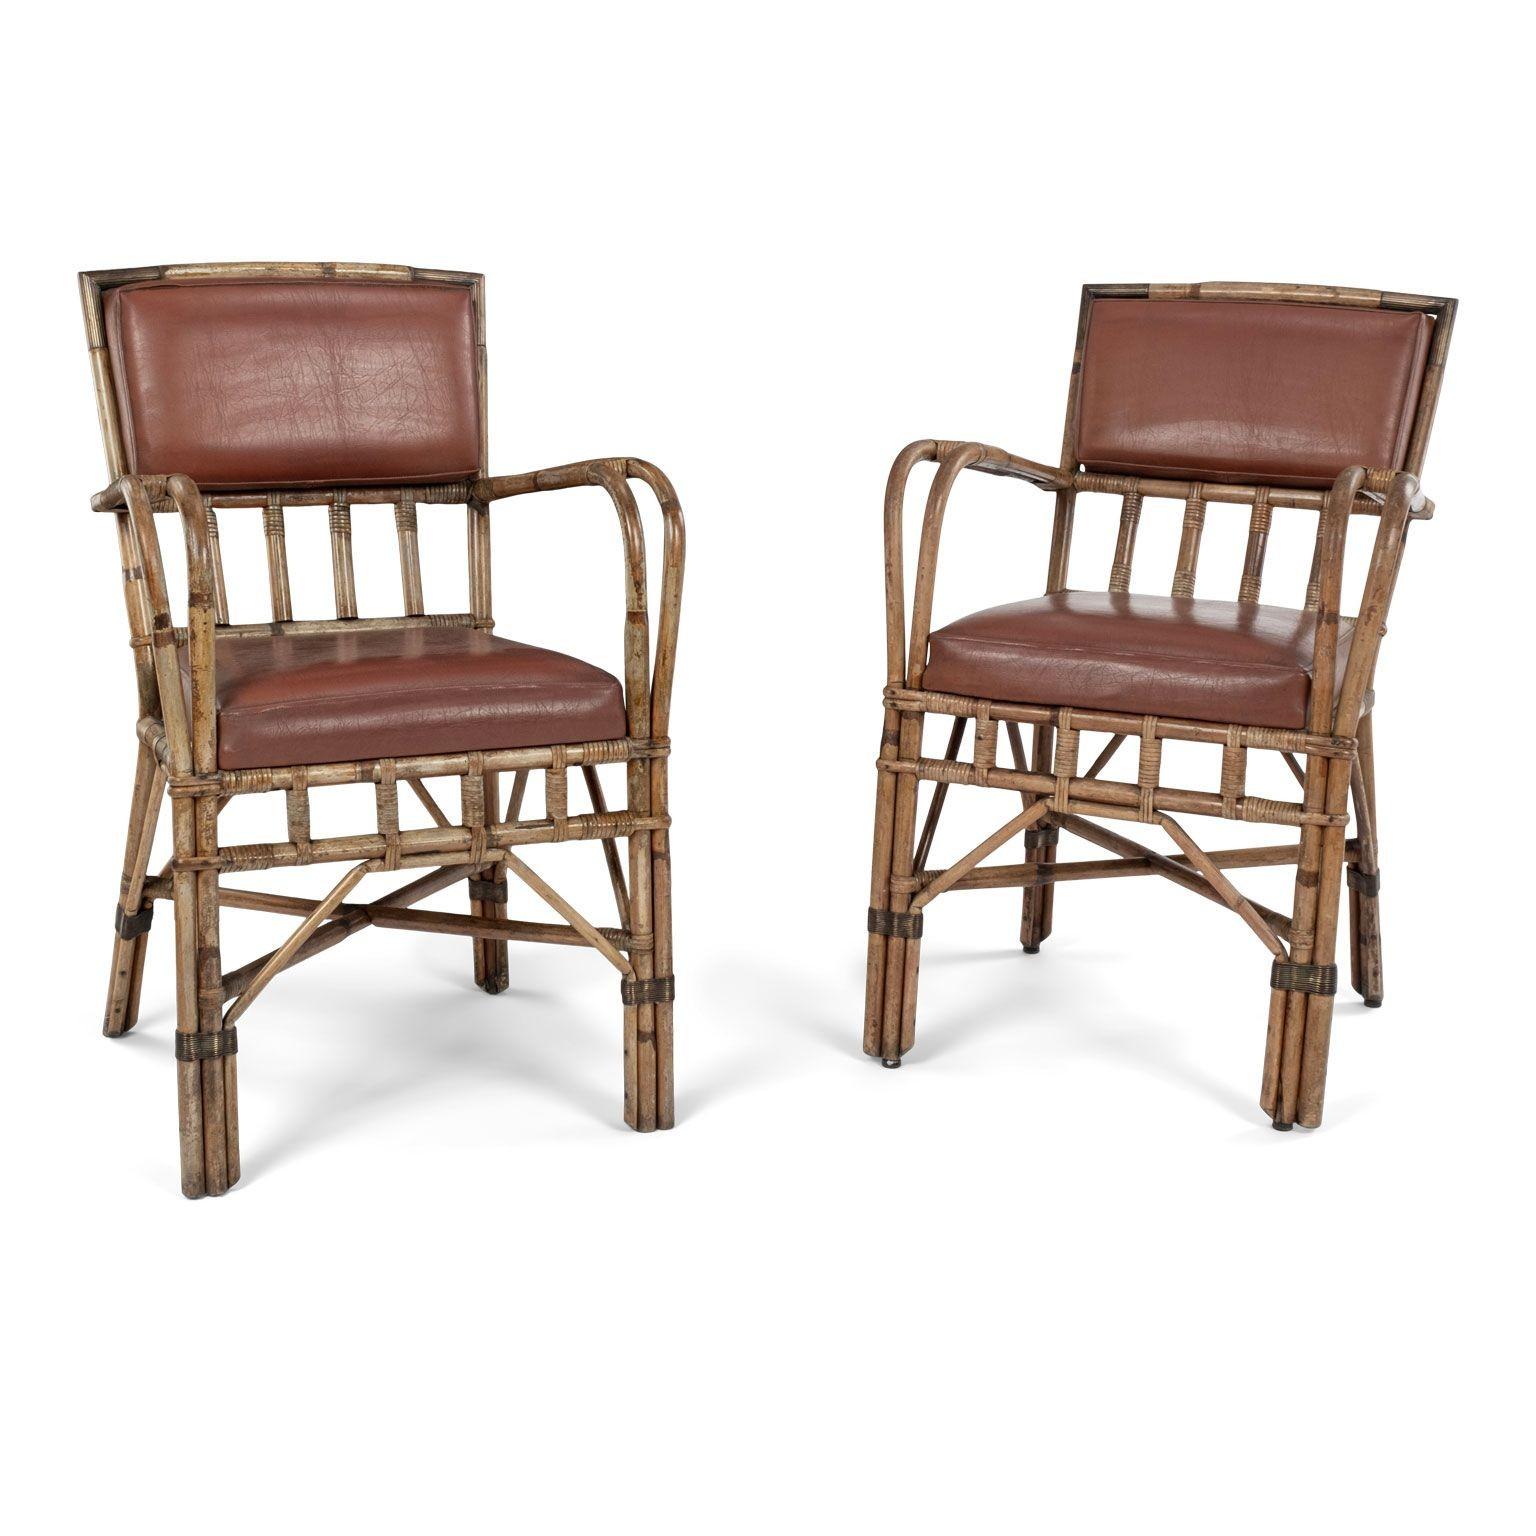 Pair of Vintage French Bamboo Armchairs circa 1965-1984. Sold together and priced $6,800 for the pair.

Note: Regional differences in humidity and climate during shipping may cause antique and vintage wood to shrink and/or split along its grain,